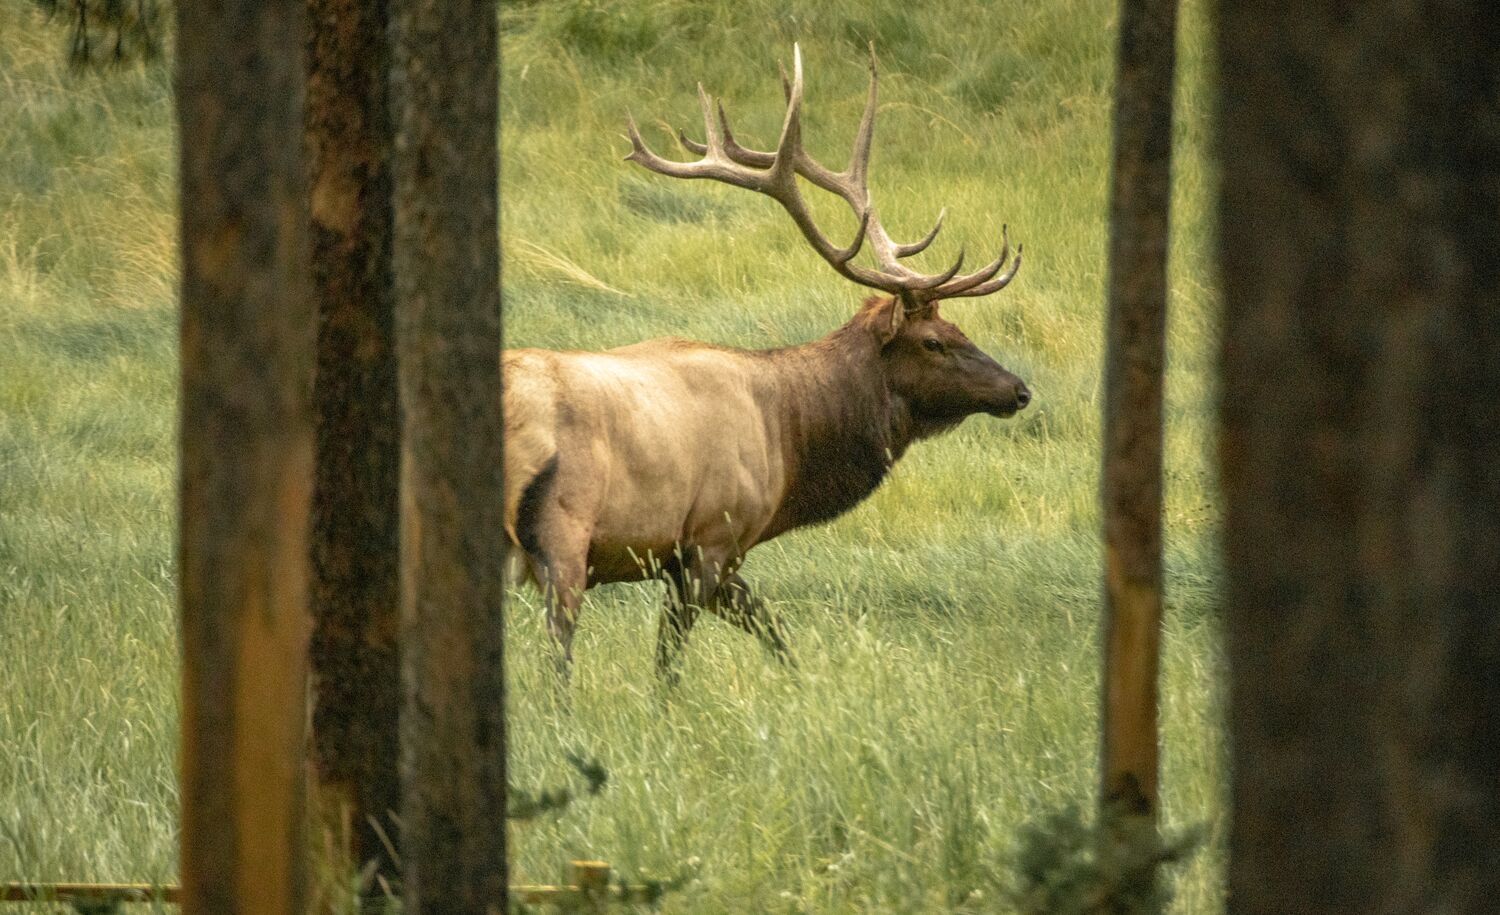 Photo of wildlife that appeared on the Discover Banff and it's Wildlife Tour in Banff National Park